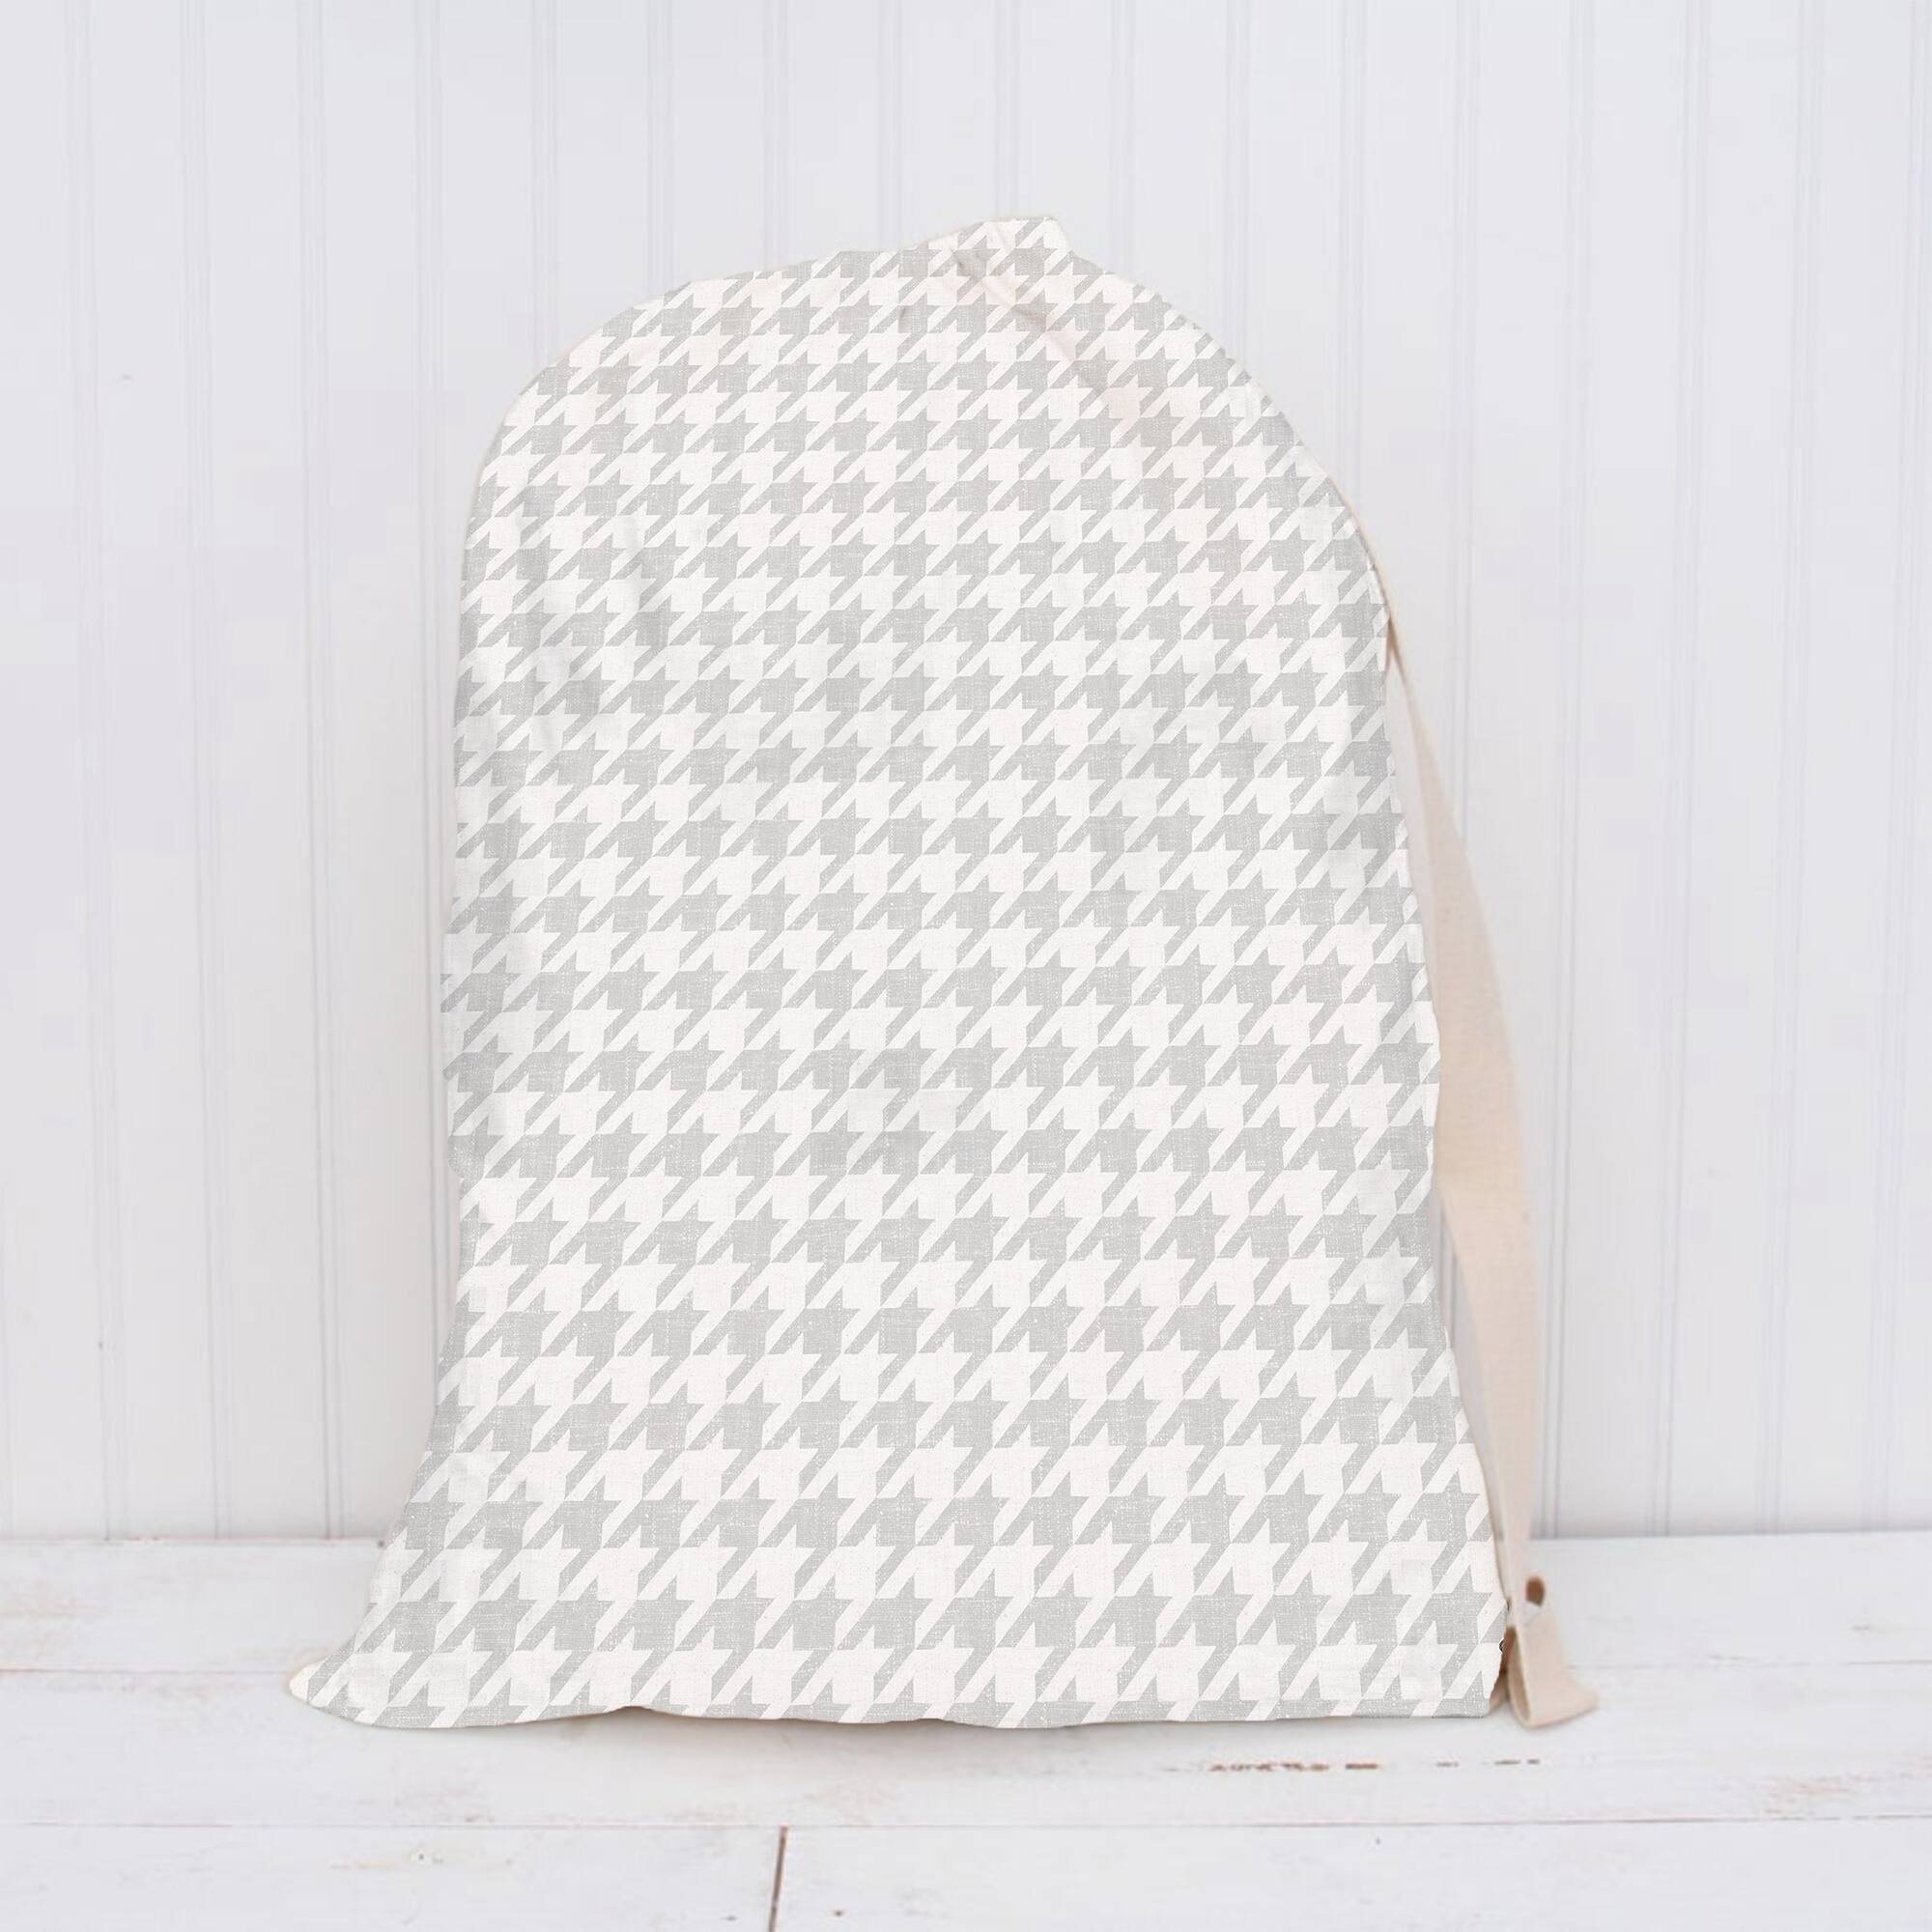 HOUNDSTOOTH GREY Laundry Bag By Kavka Designs - 28